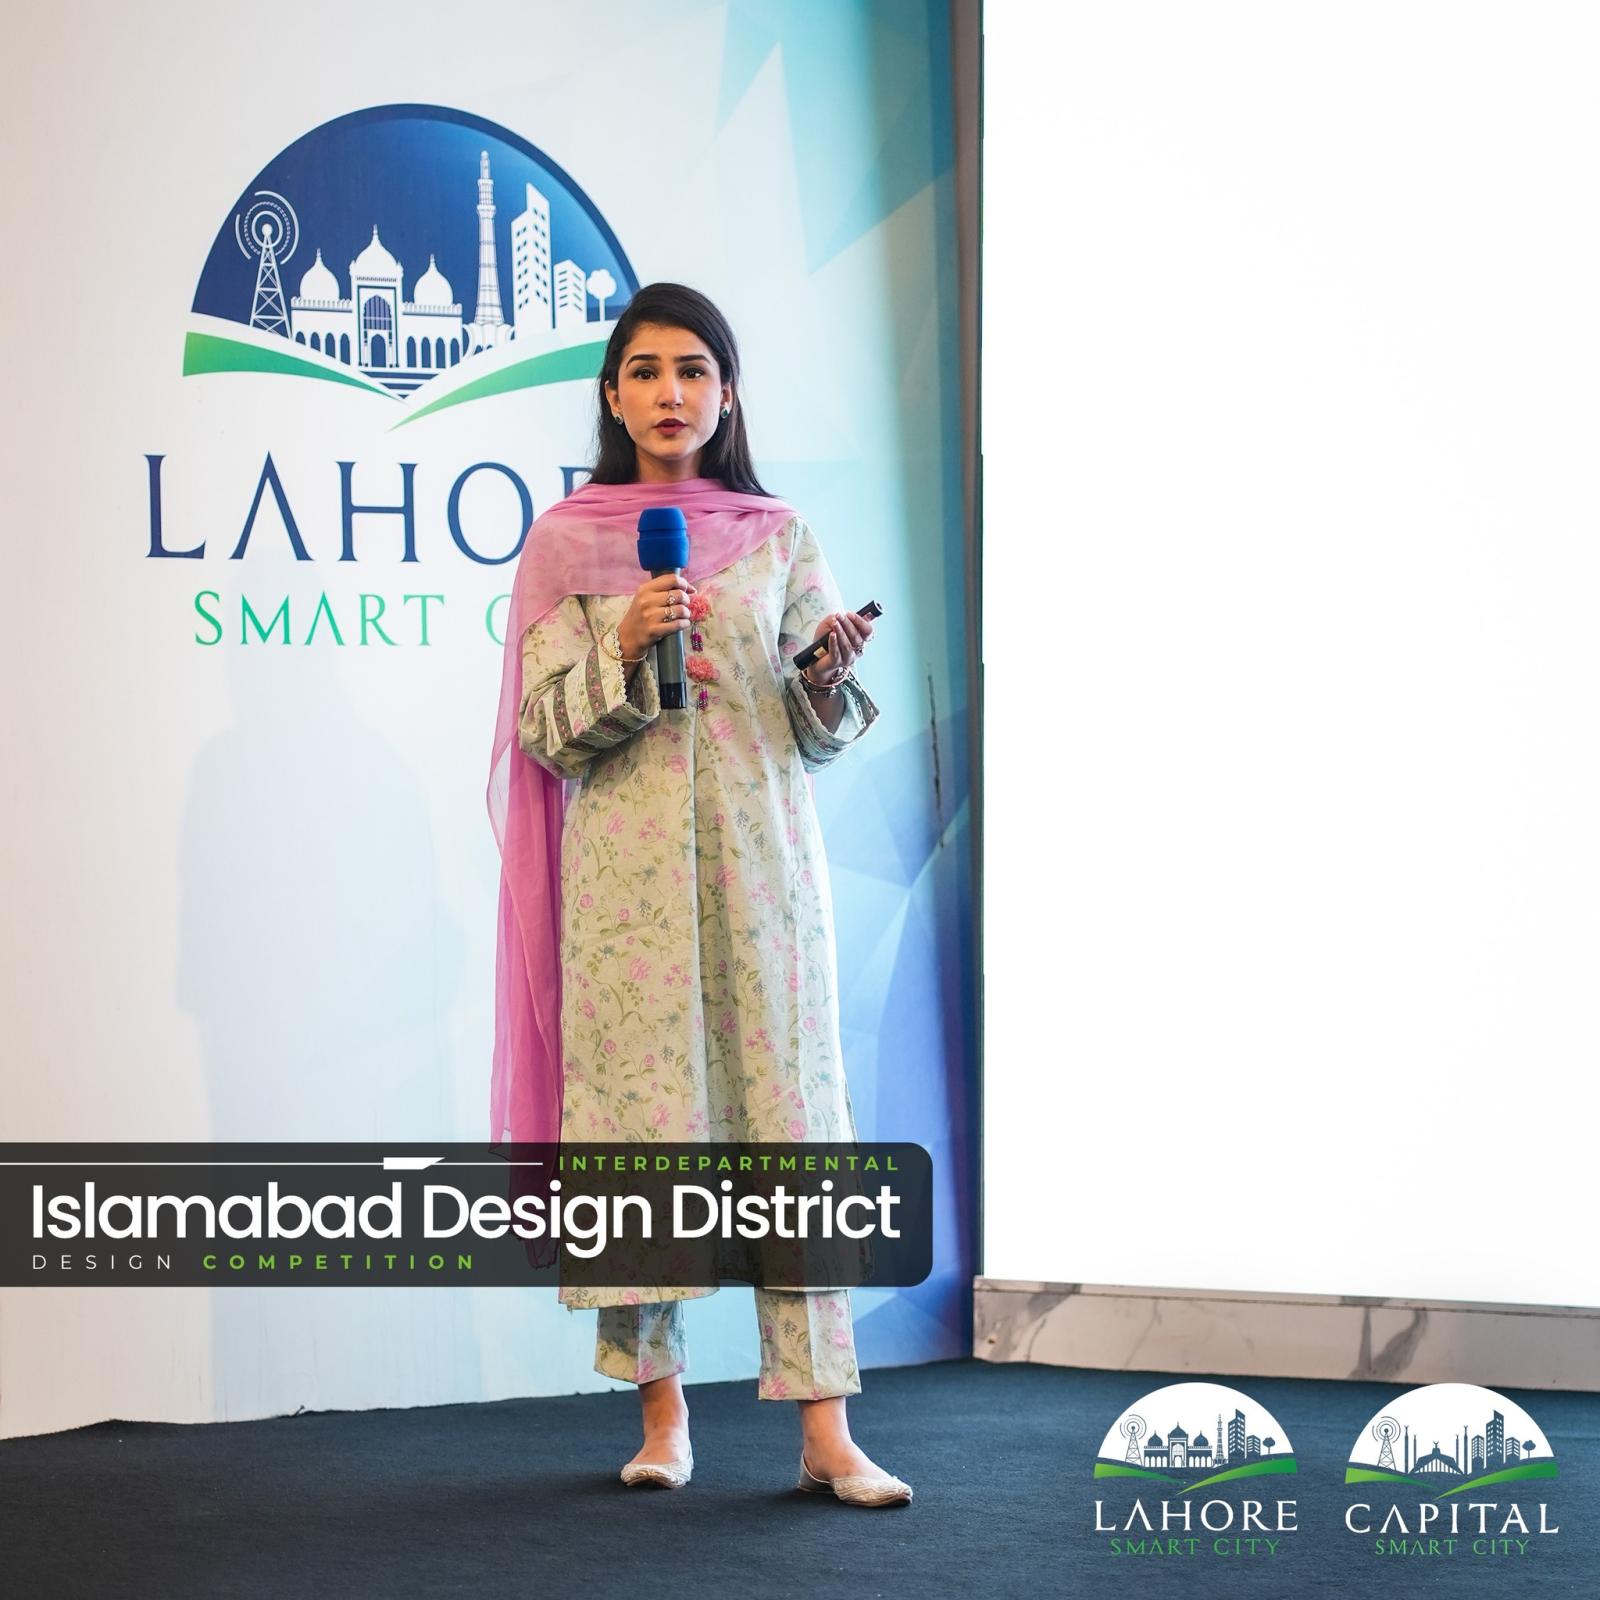 Interdepartmental Islamabad Design District Competition